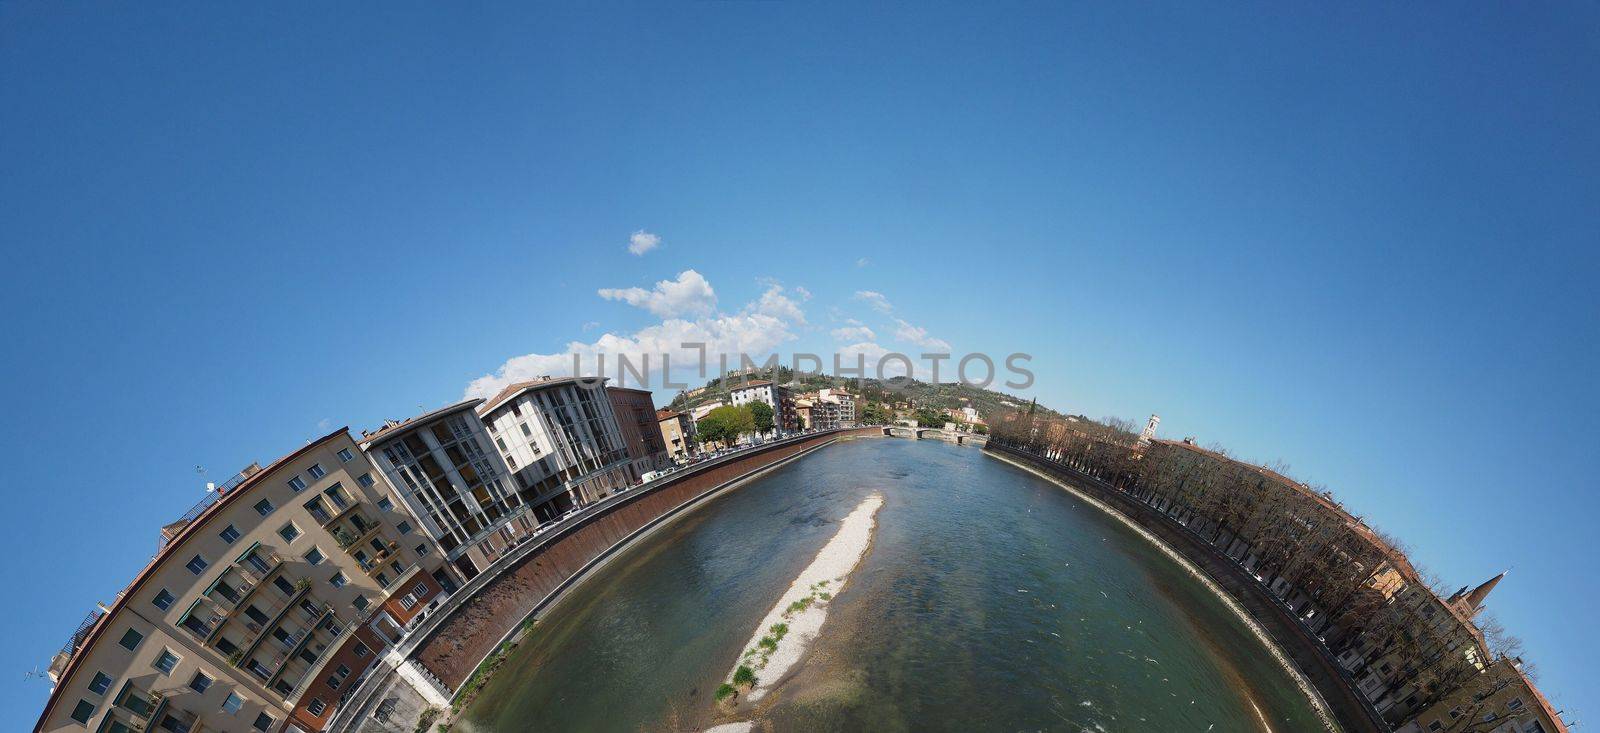 Little planet view of the city of Verona, Italy seen from the river